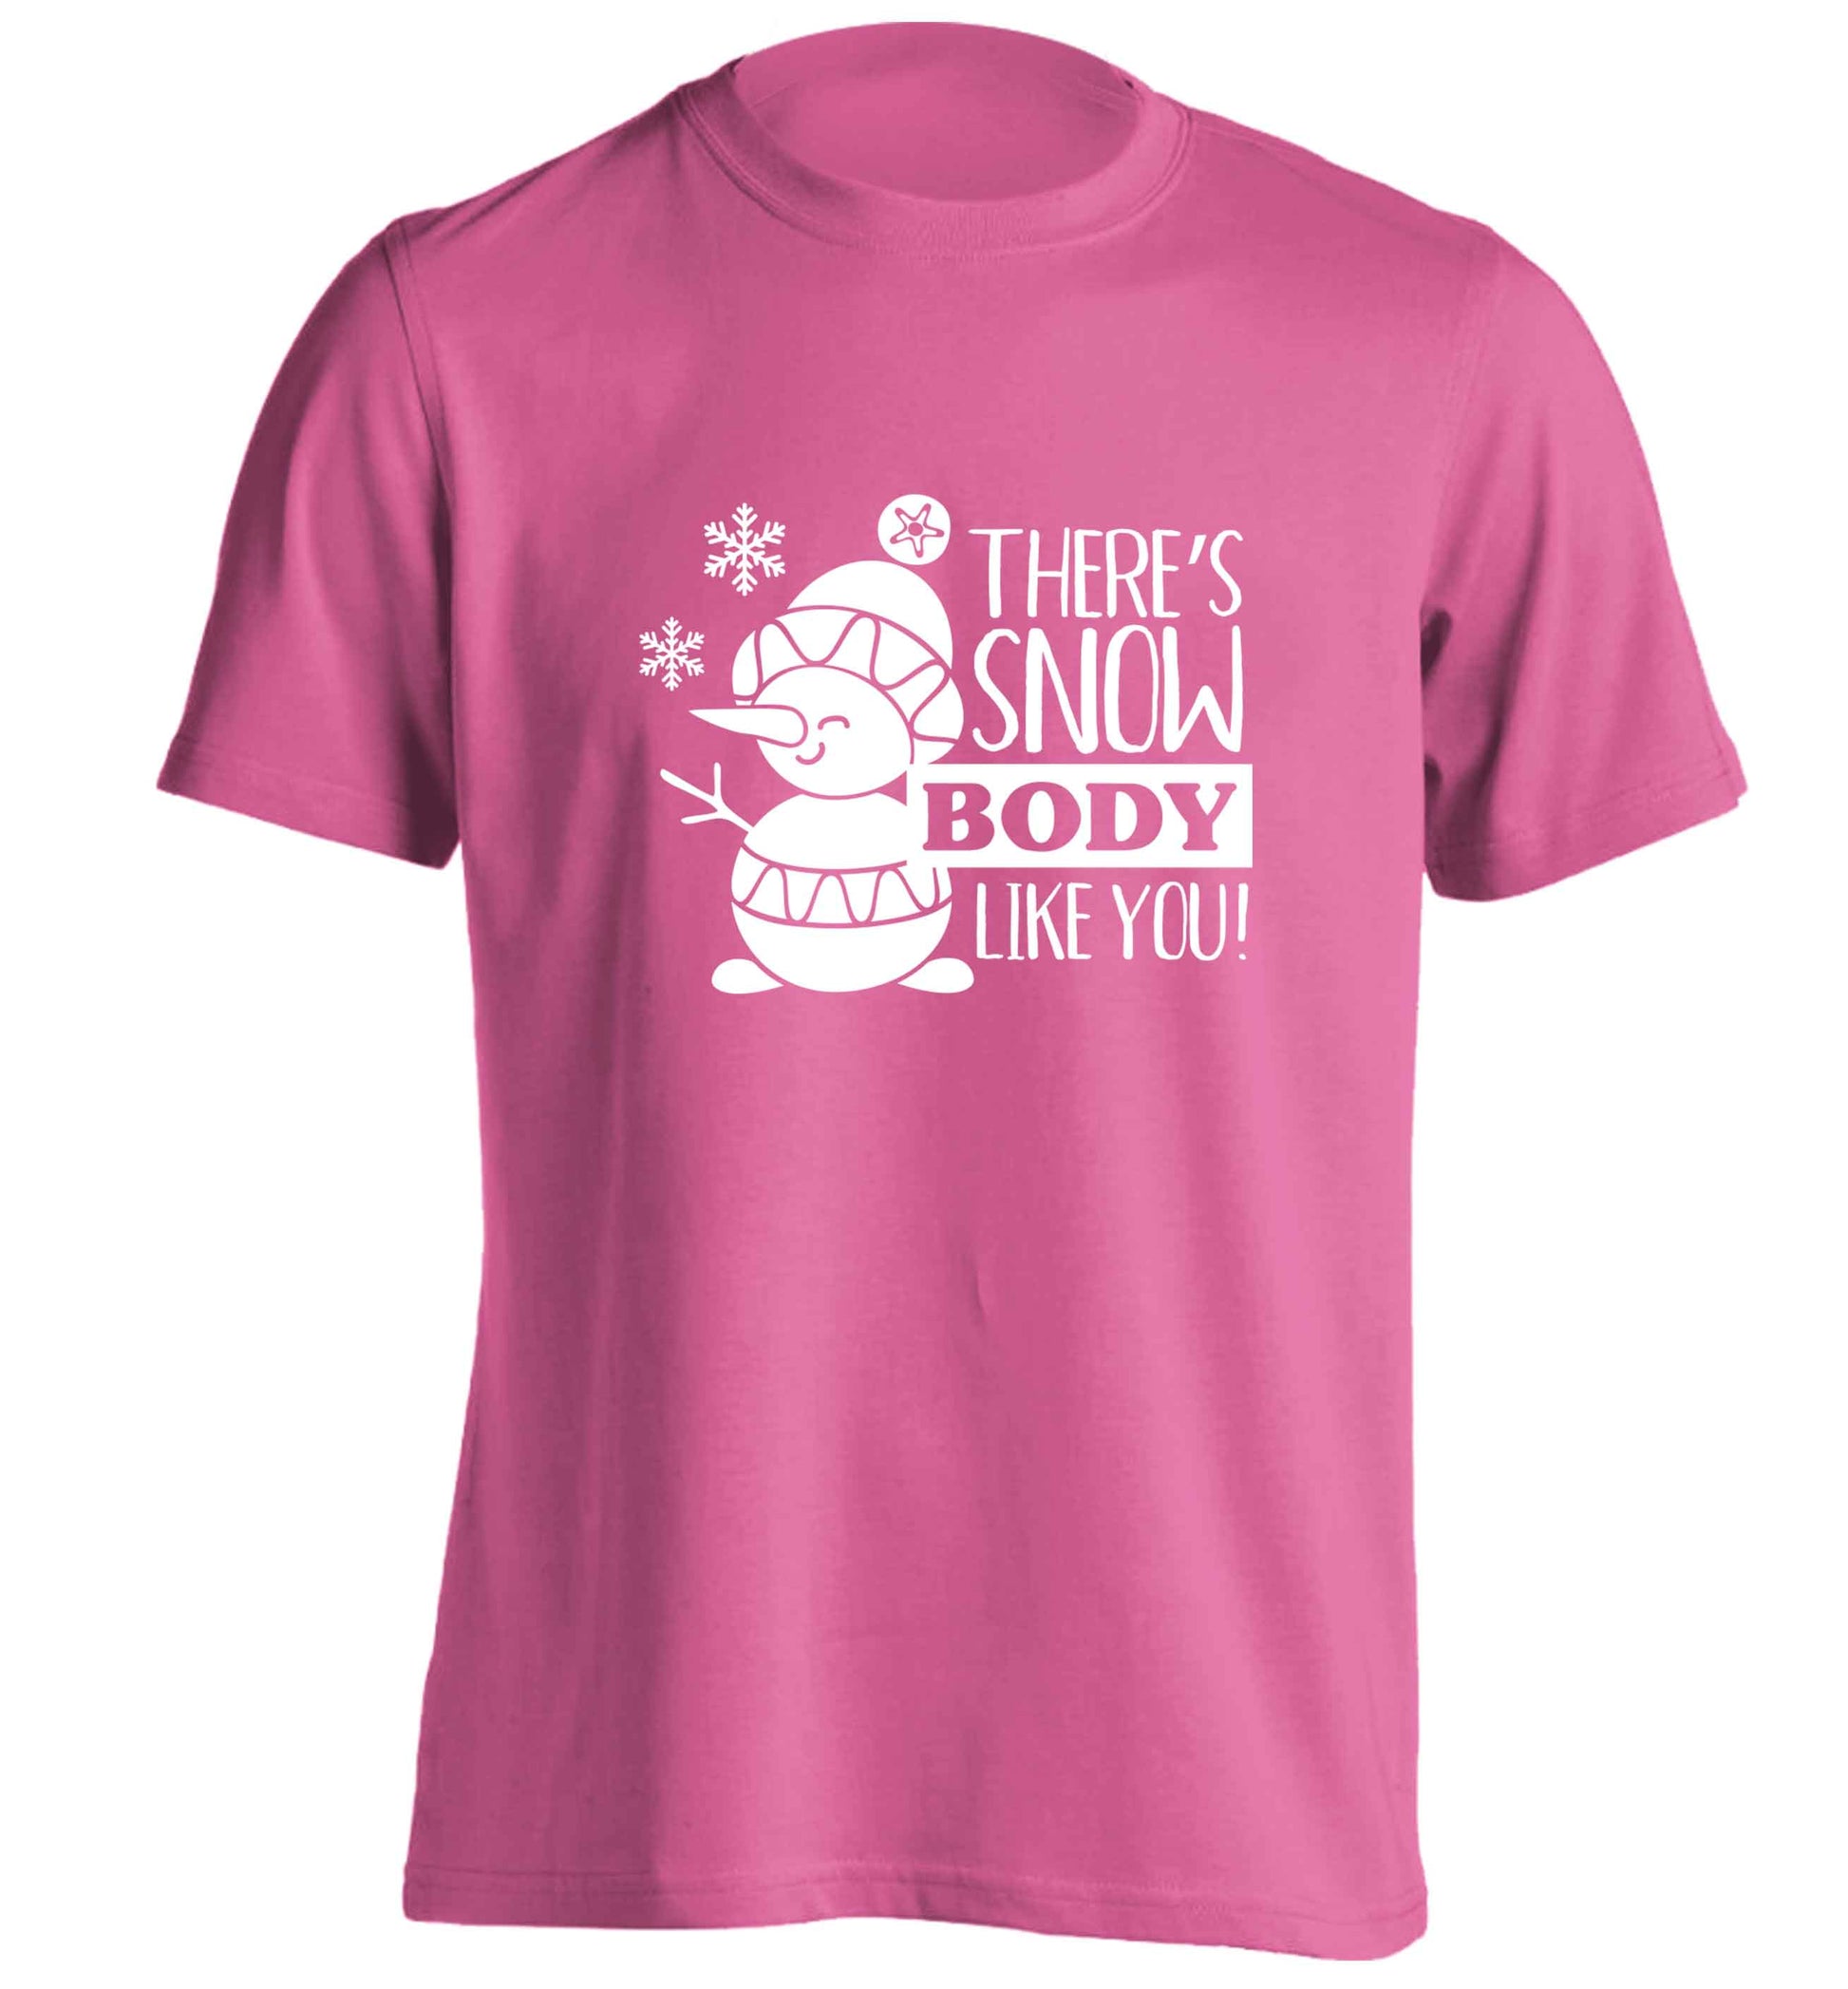 There's snow body like you adults unisex pink Tshirt 2XL